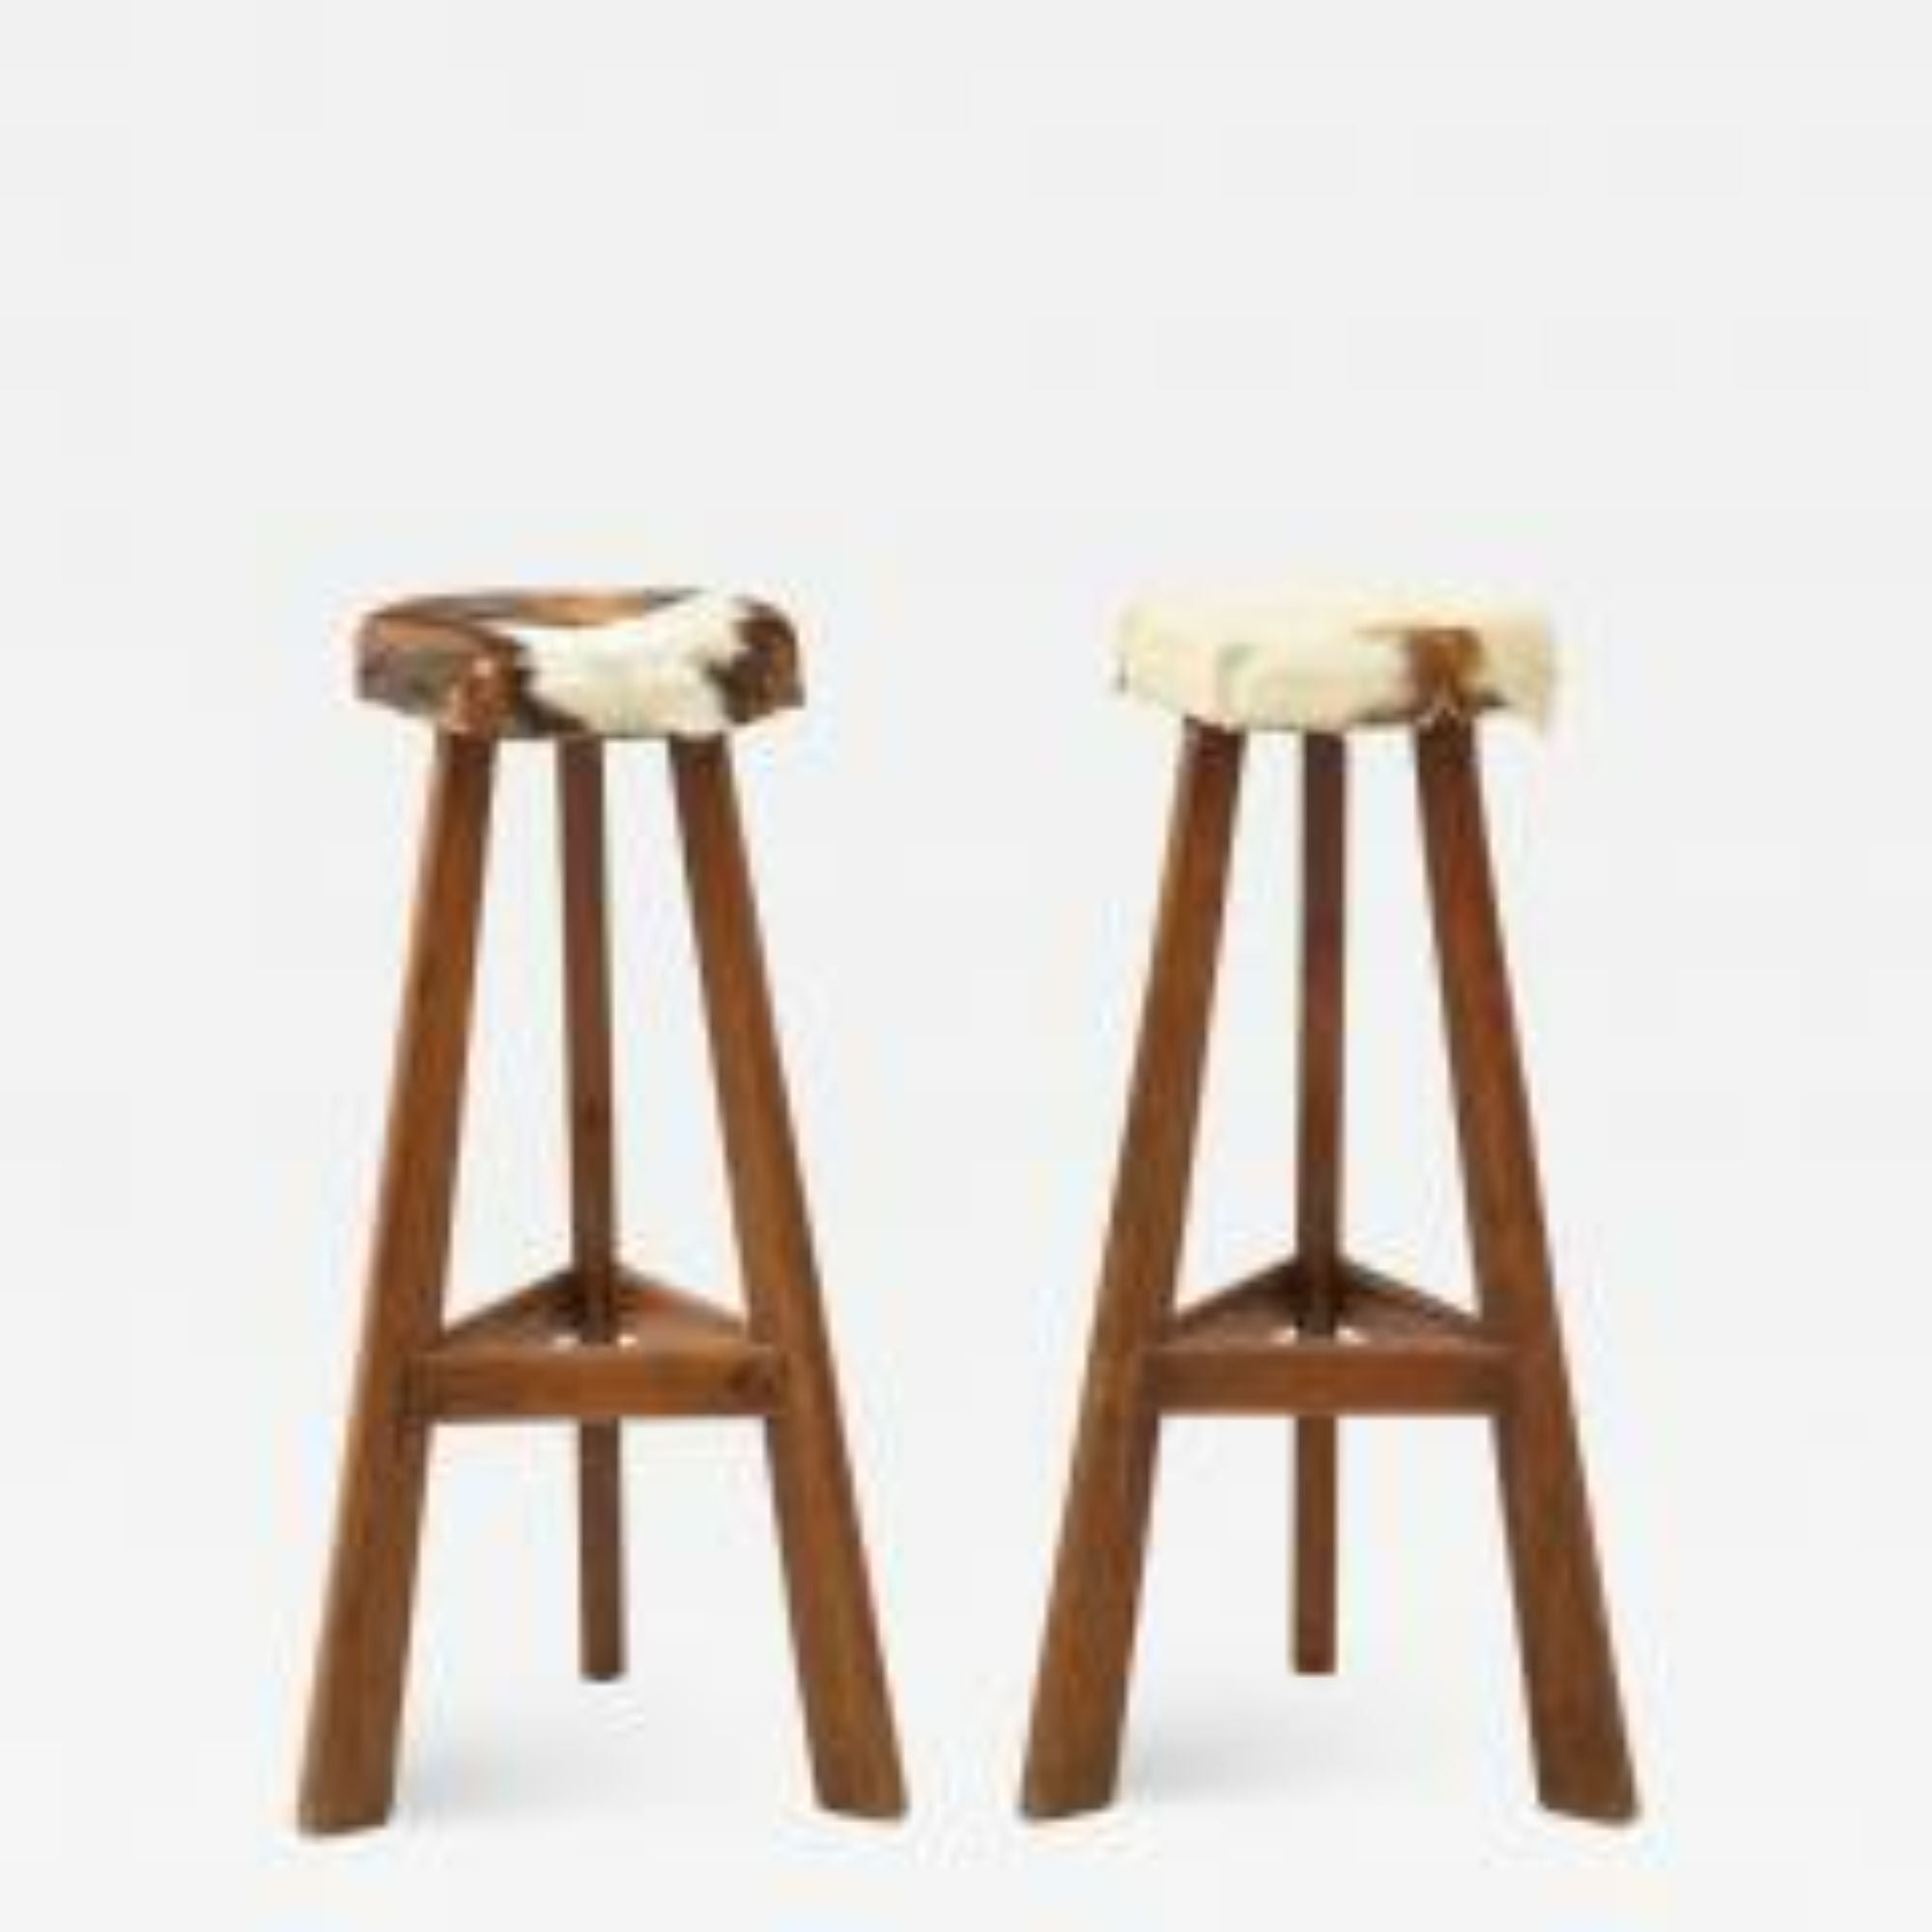 Pair of French midcentury Stools with Cowhide Seats

Stunning pair of French midcentury stools.
Elegant tapered wood legs, plush cowhide fur seats, and handsome joinery details.

Additional Information:
Materials: Wood, Cowhide Fur
Origin: